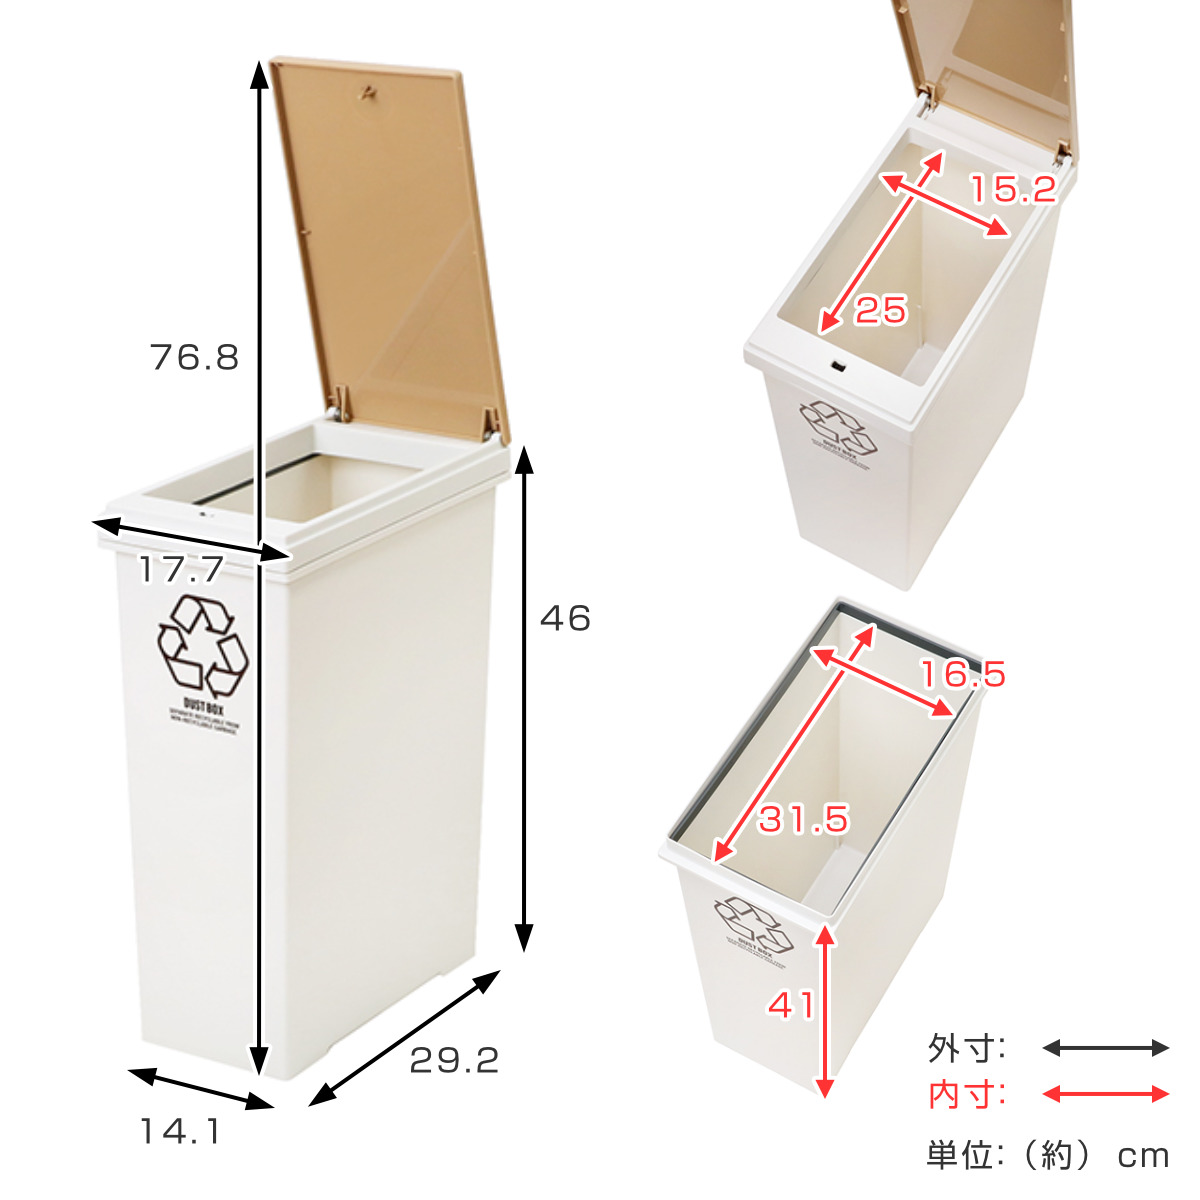  waste basket 60L. source litter horizontal 3 minute another Wagon ( trash can 60 liter 20L 3 piece set one push pedestal attaching minute another kitchen cover attaching 20 liter stylish simple )